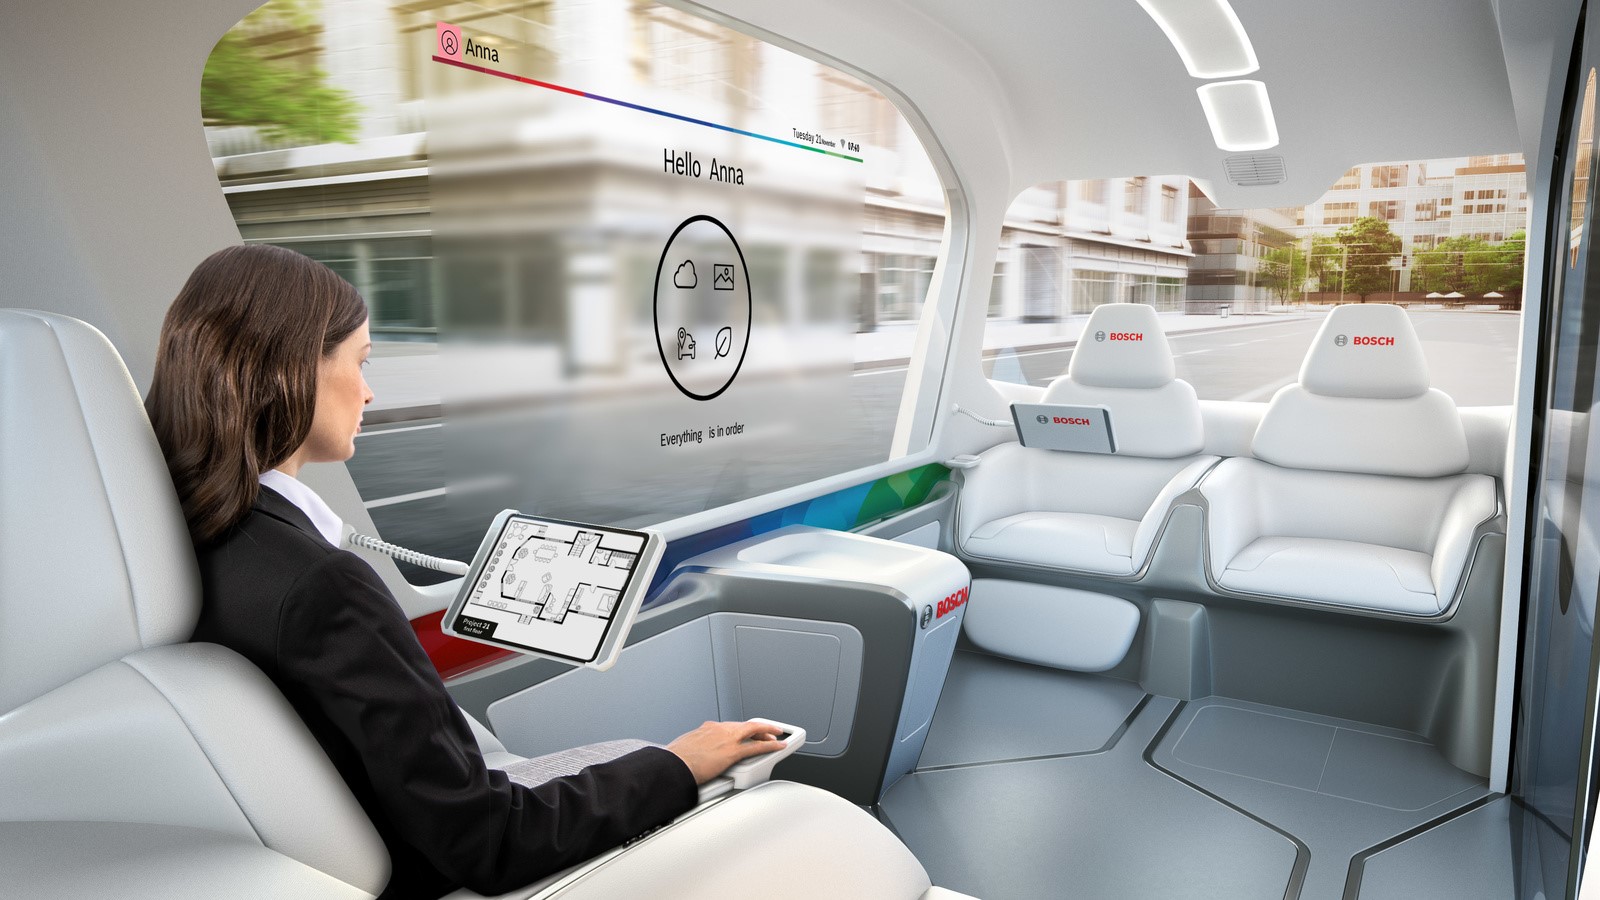 World first at CES: Bosch presents the concept shuttle vehicle